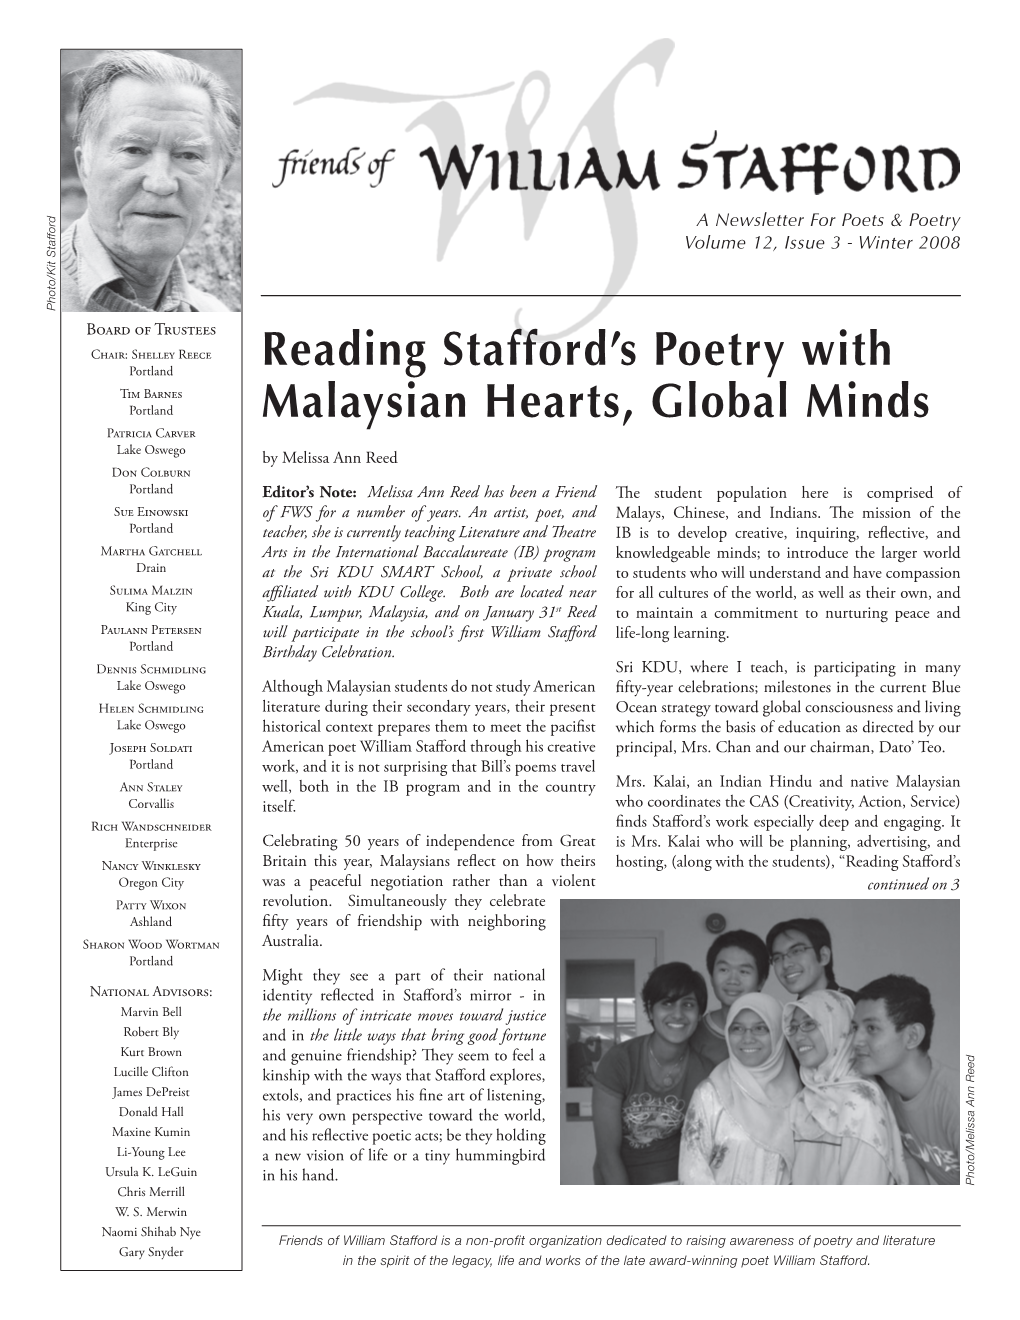 Reading Stafford's Poetry with Malaysian Hearts, Global Minds